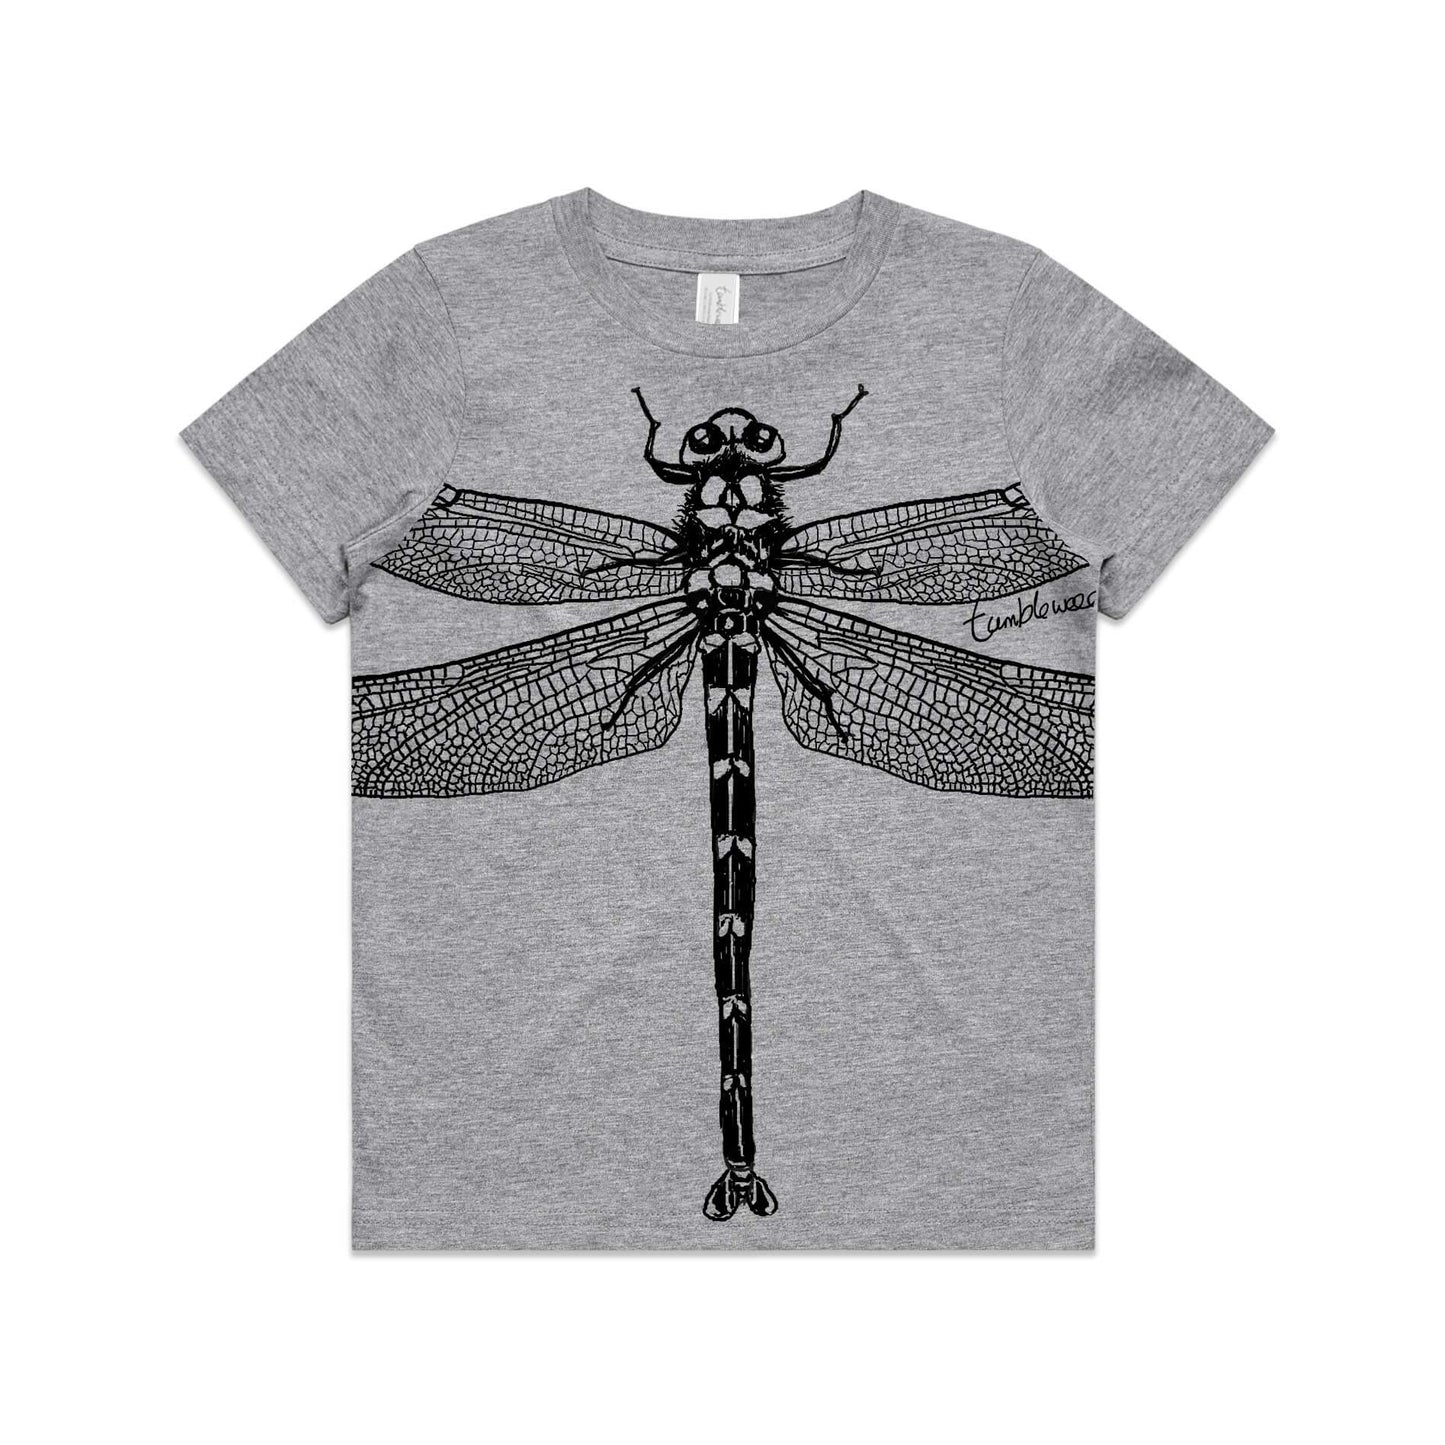 Grey marle, cotton kids' t-shirt with screen printed Kids dragonfly design.